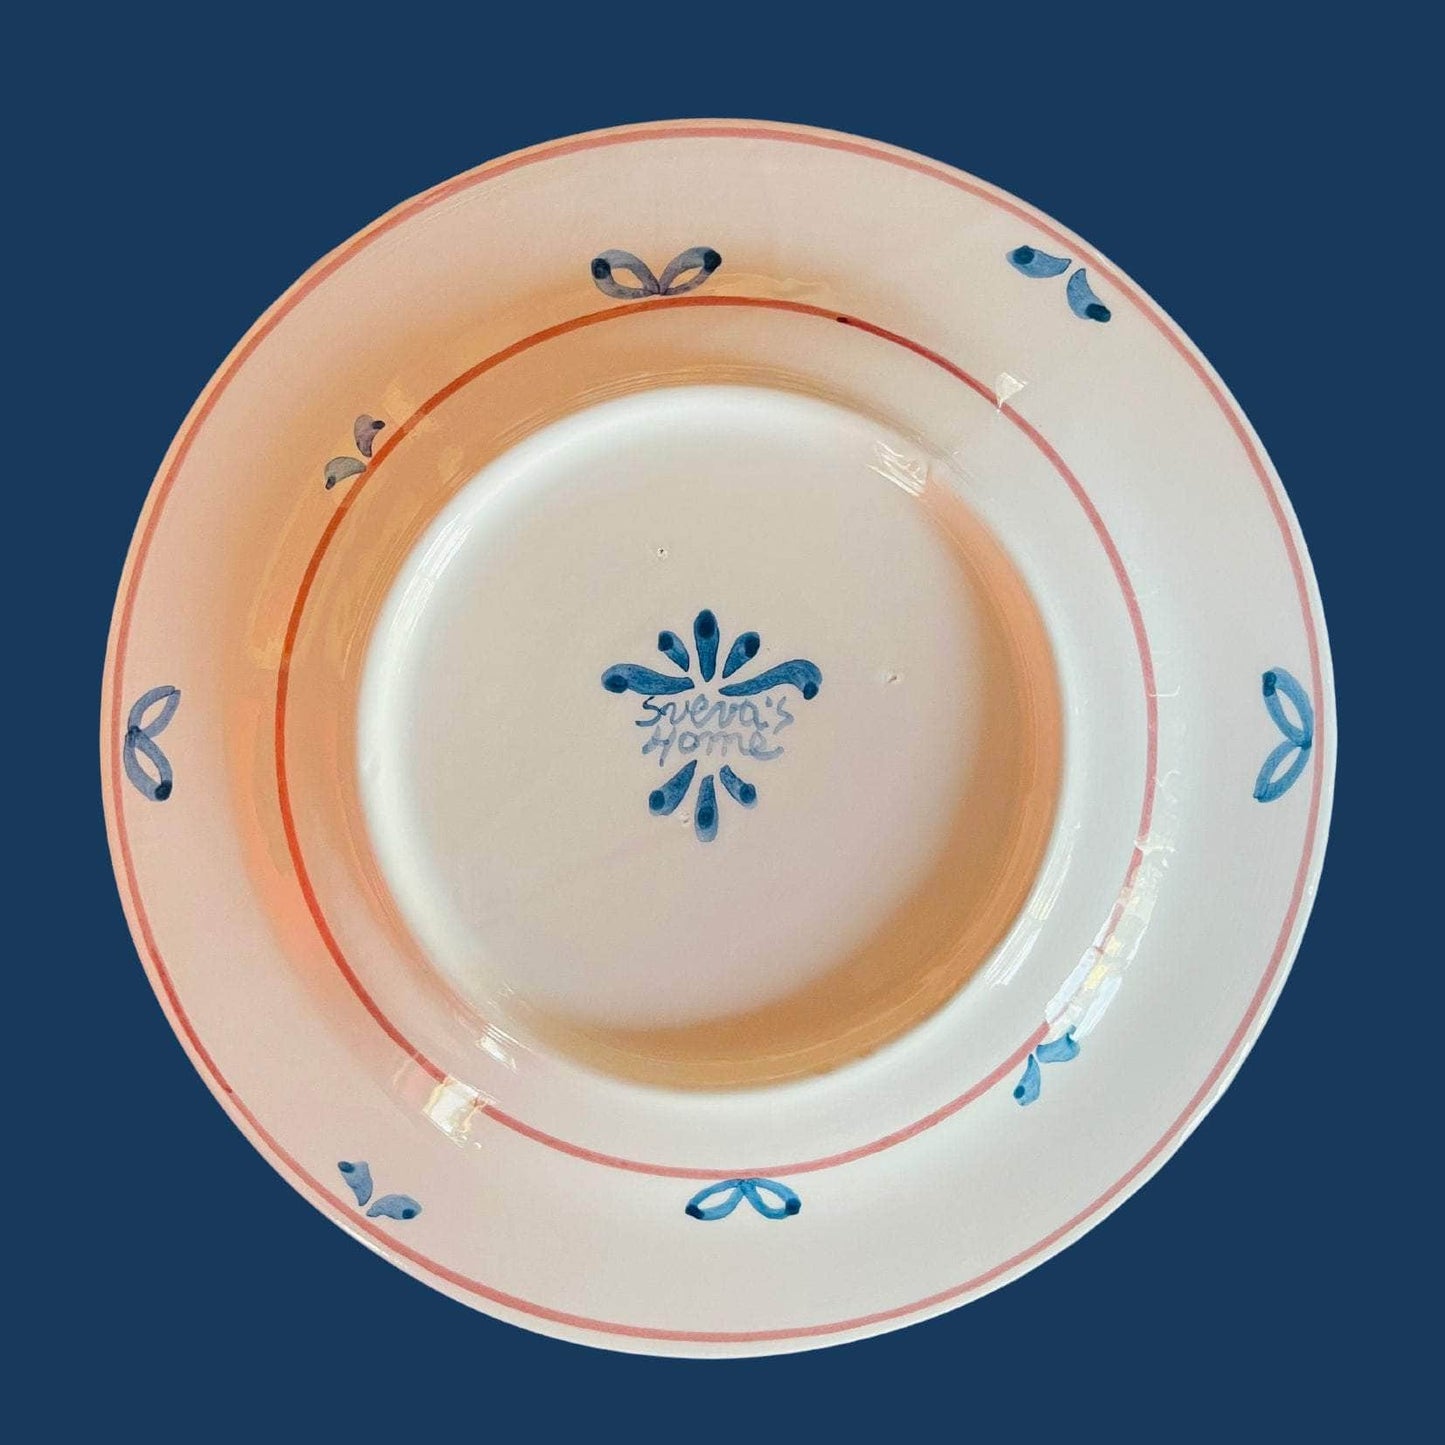 Load image into Gallery viewer, Ceramic Blue Dining Plate | Set of 12
